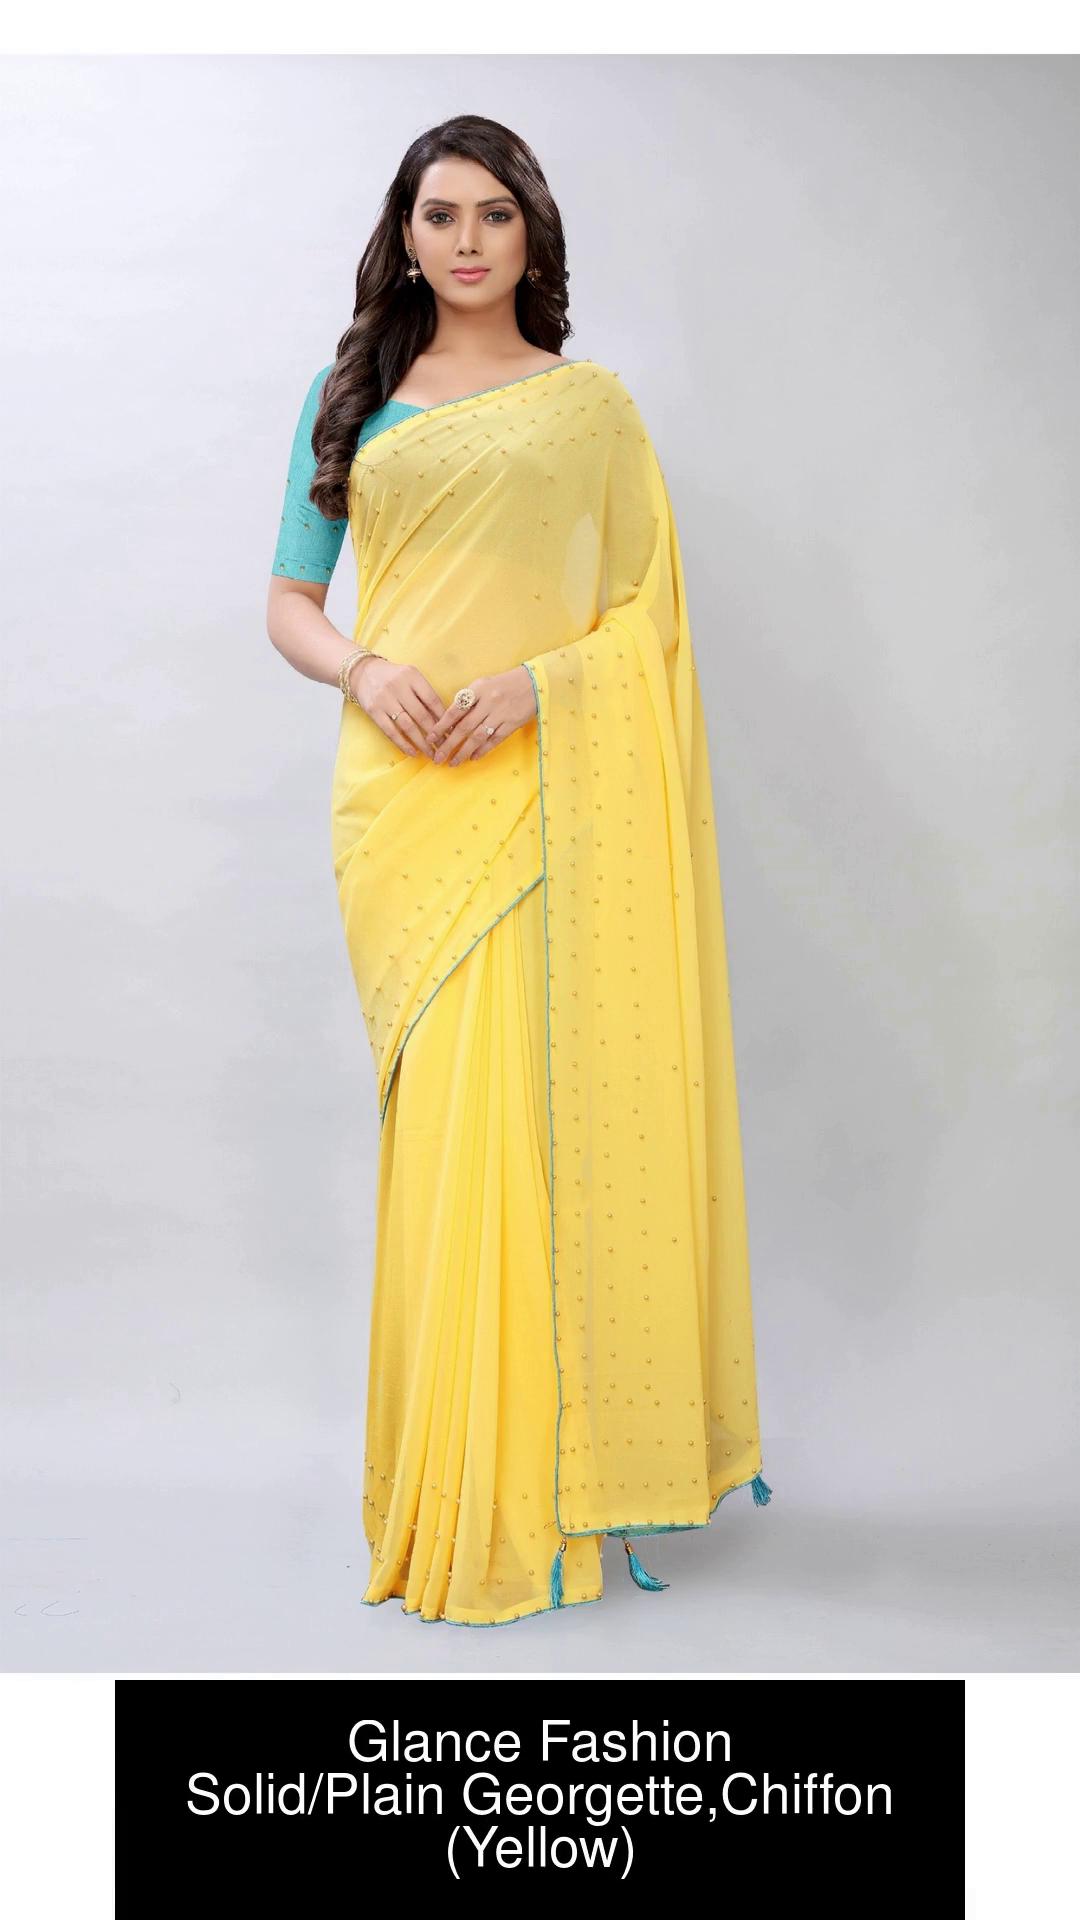 Nalli - Lemon Yellow Chiffon Saree with Plain body and Zari border.  Includes unstitched blouse. The price of this saree is Rs. 4,093/- . To  shop online please visit the link below